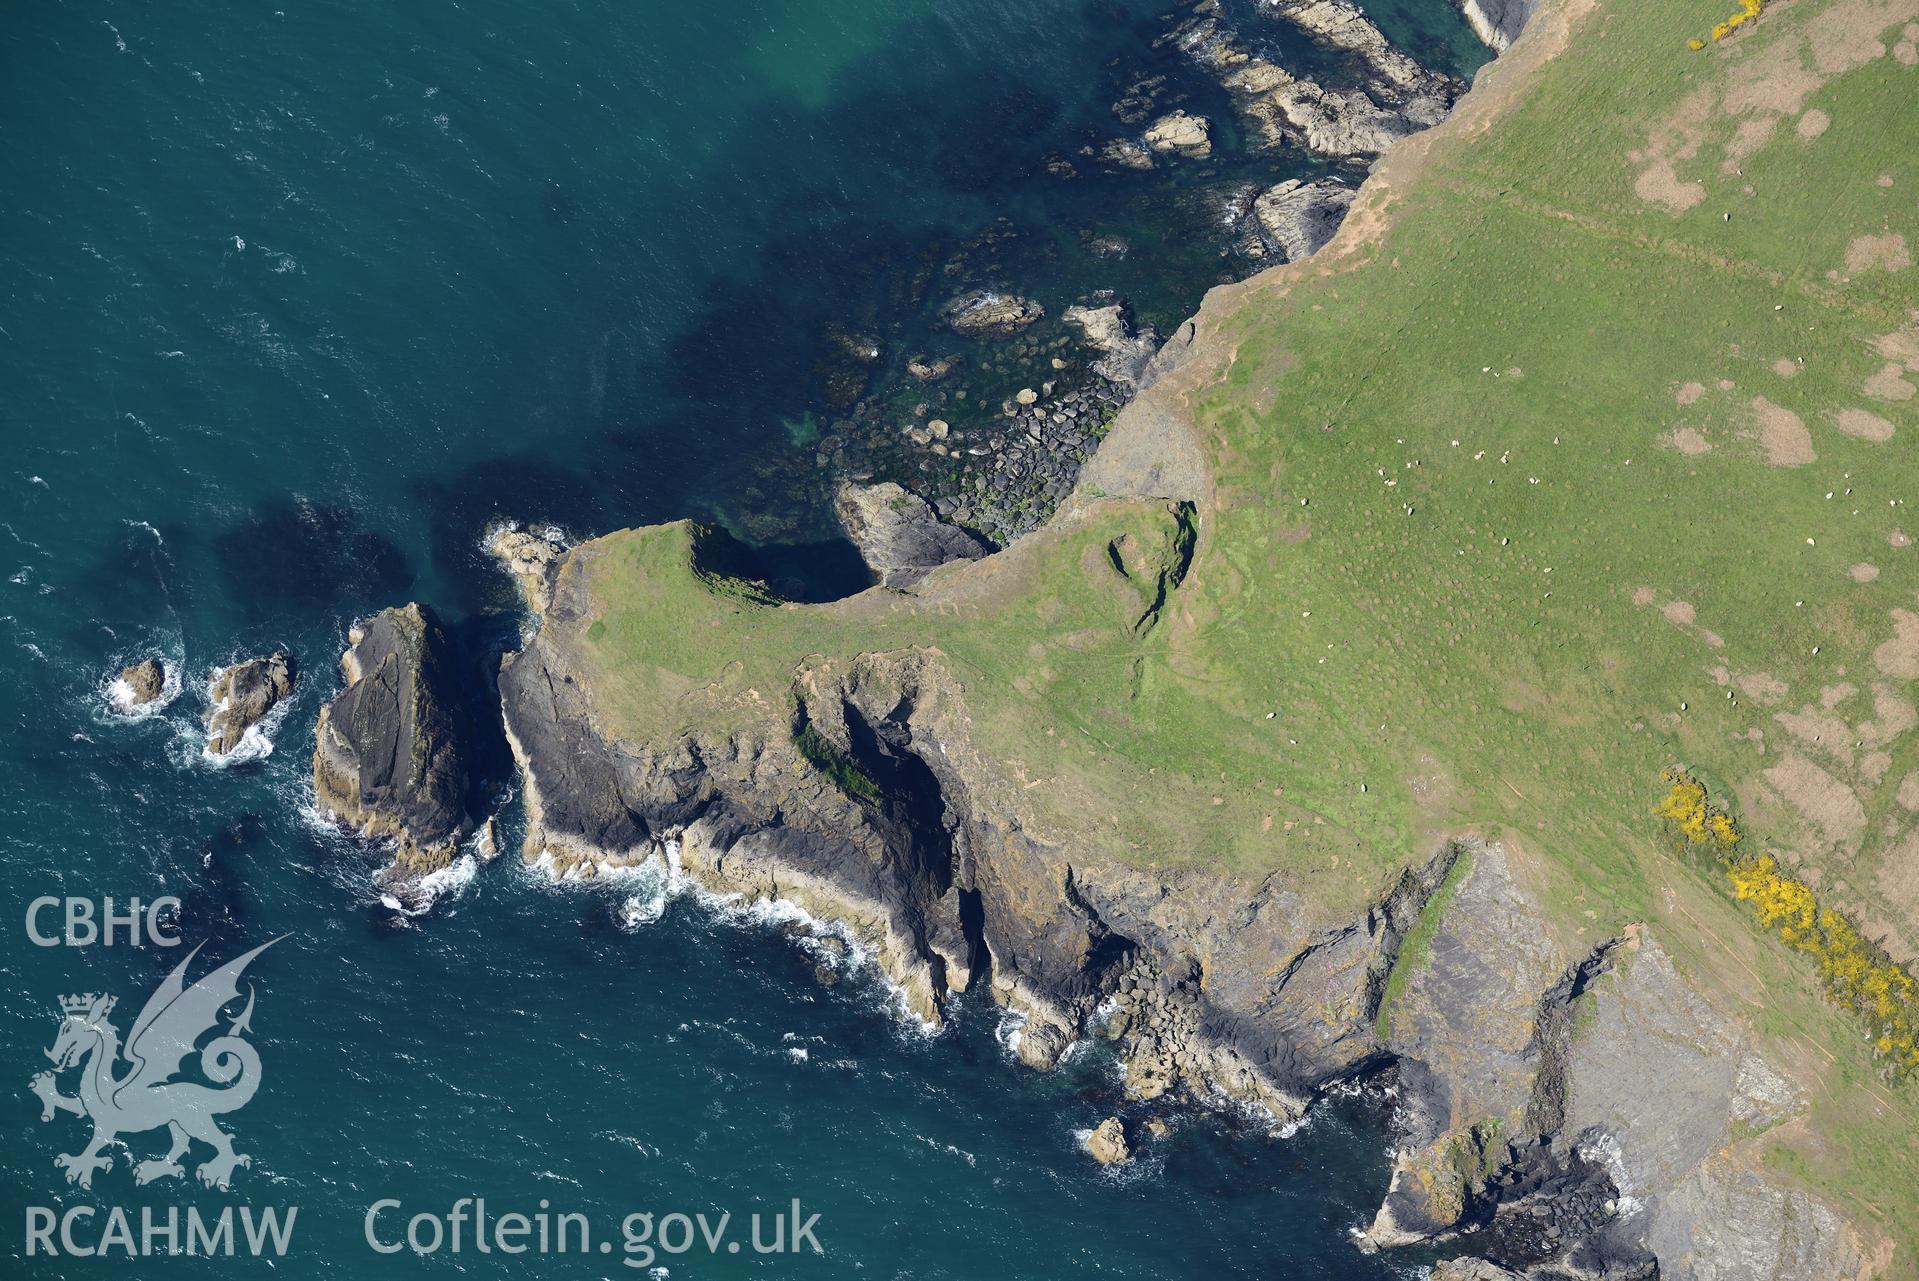 Aerial photography of Trwyn Gwningaer taken on 3rd May 2017.  Baseline aerial reconnaissance survey for the CHERISH Project. ? Crown: CHERISH PROJECT 2017. Produced with EU funds through the Ireland Wales Co-operation Programme 2014-2020. All material made freely available through the Open Government Licence.